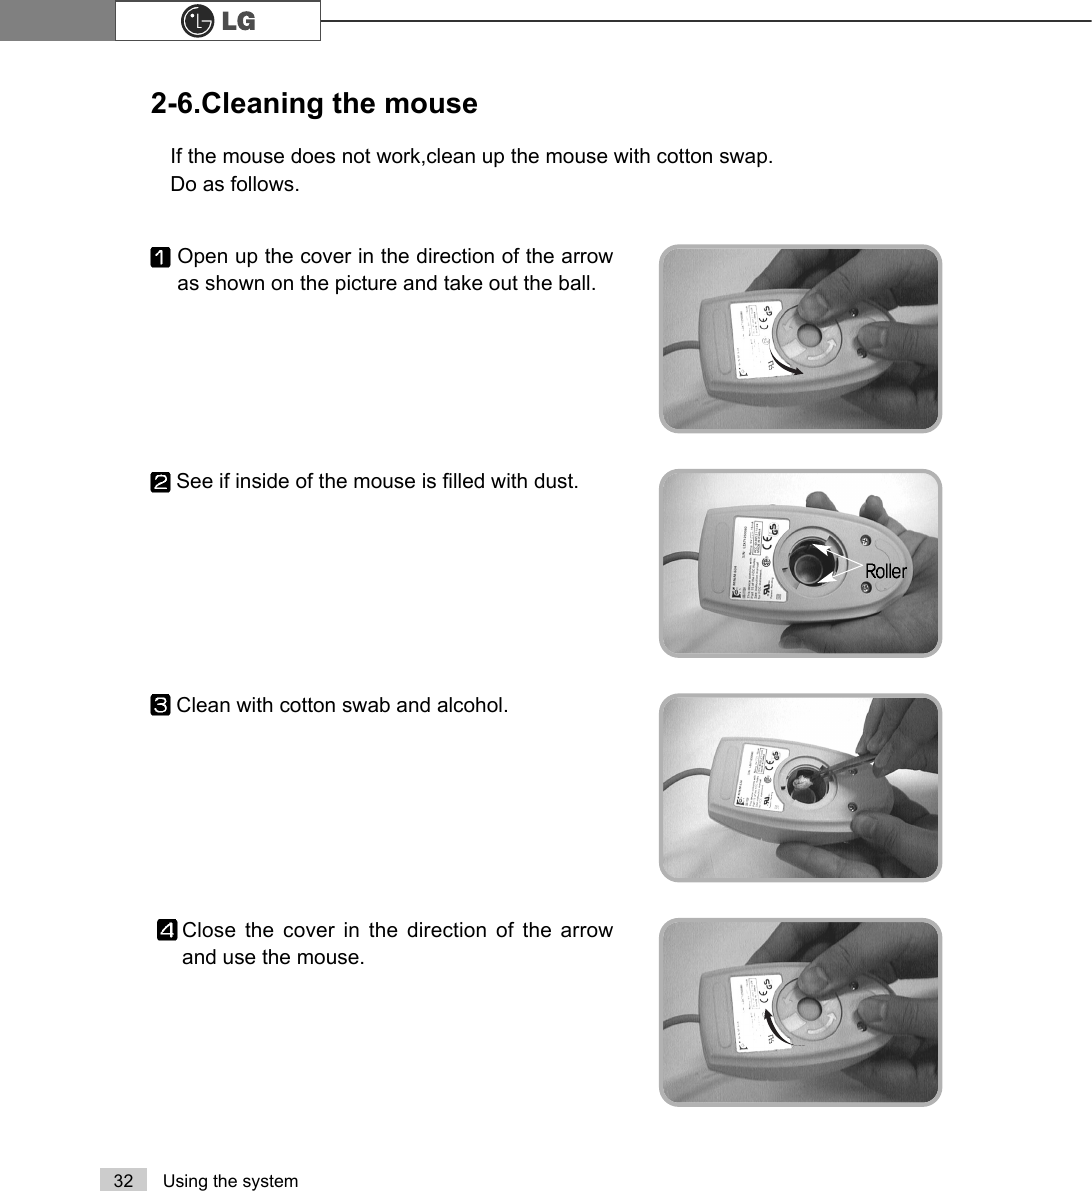 32 Using the system2-6.Cleaning the mouseIf the mouse does not work,clean up the mouse with cotton swap.Do as follows.Open up the cover in the direction of the arrowas shown on the picture and take out the ball.Close the cover in the direction of the arrowand use the mouse.Clean with cotton swab and alcohol.See if inside of the mouse is filled with dust.